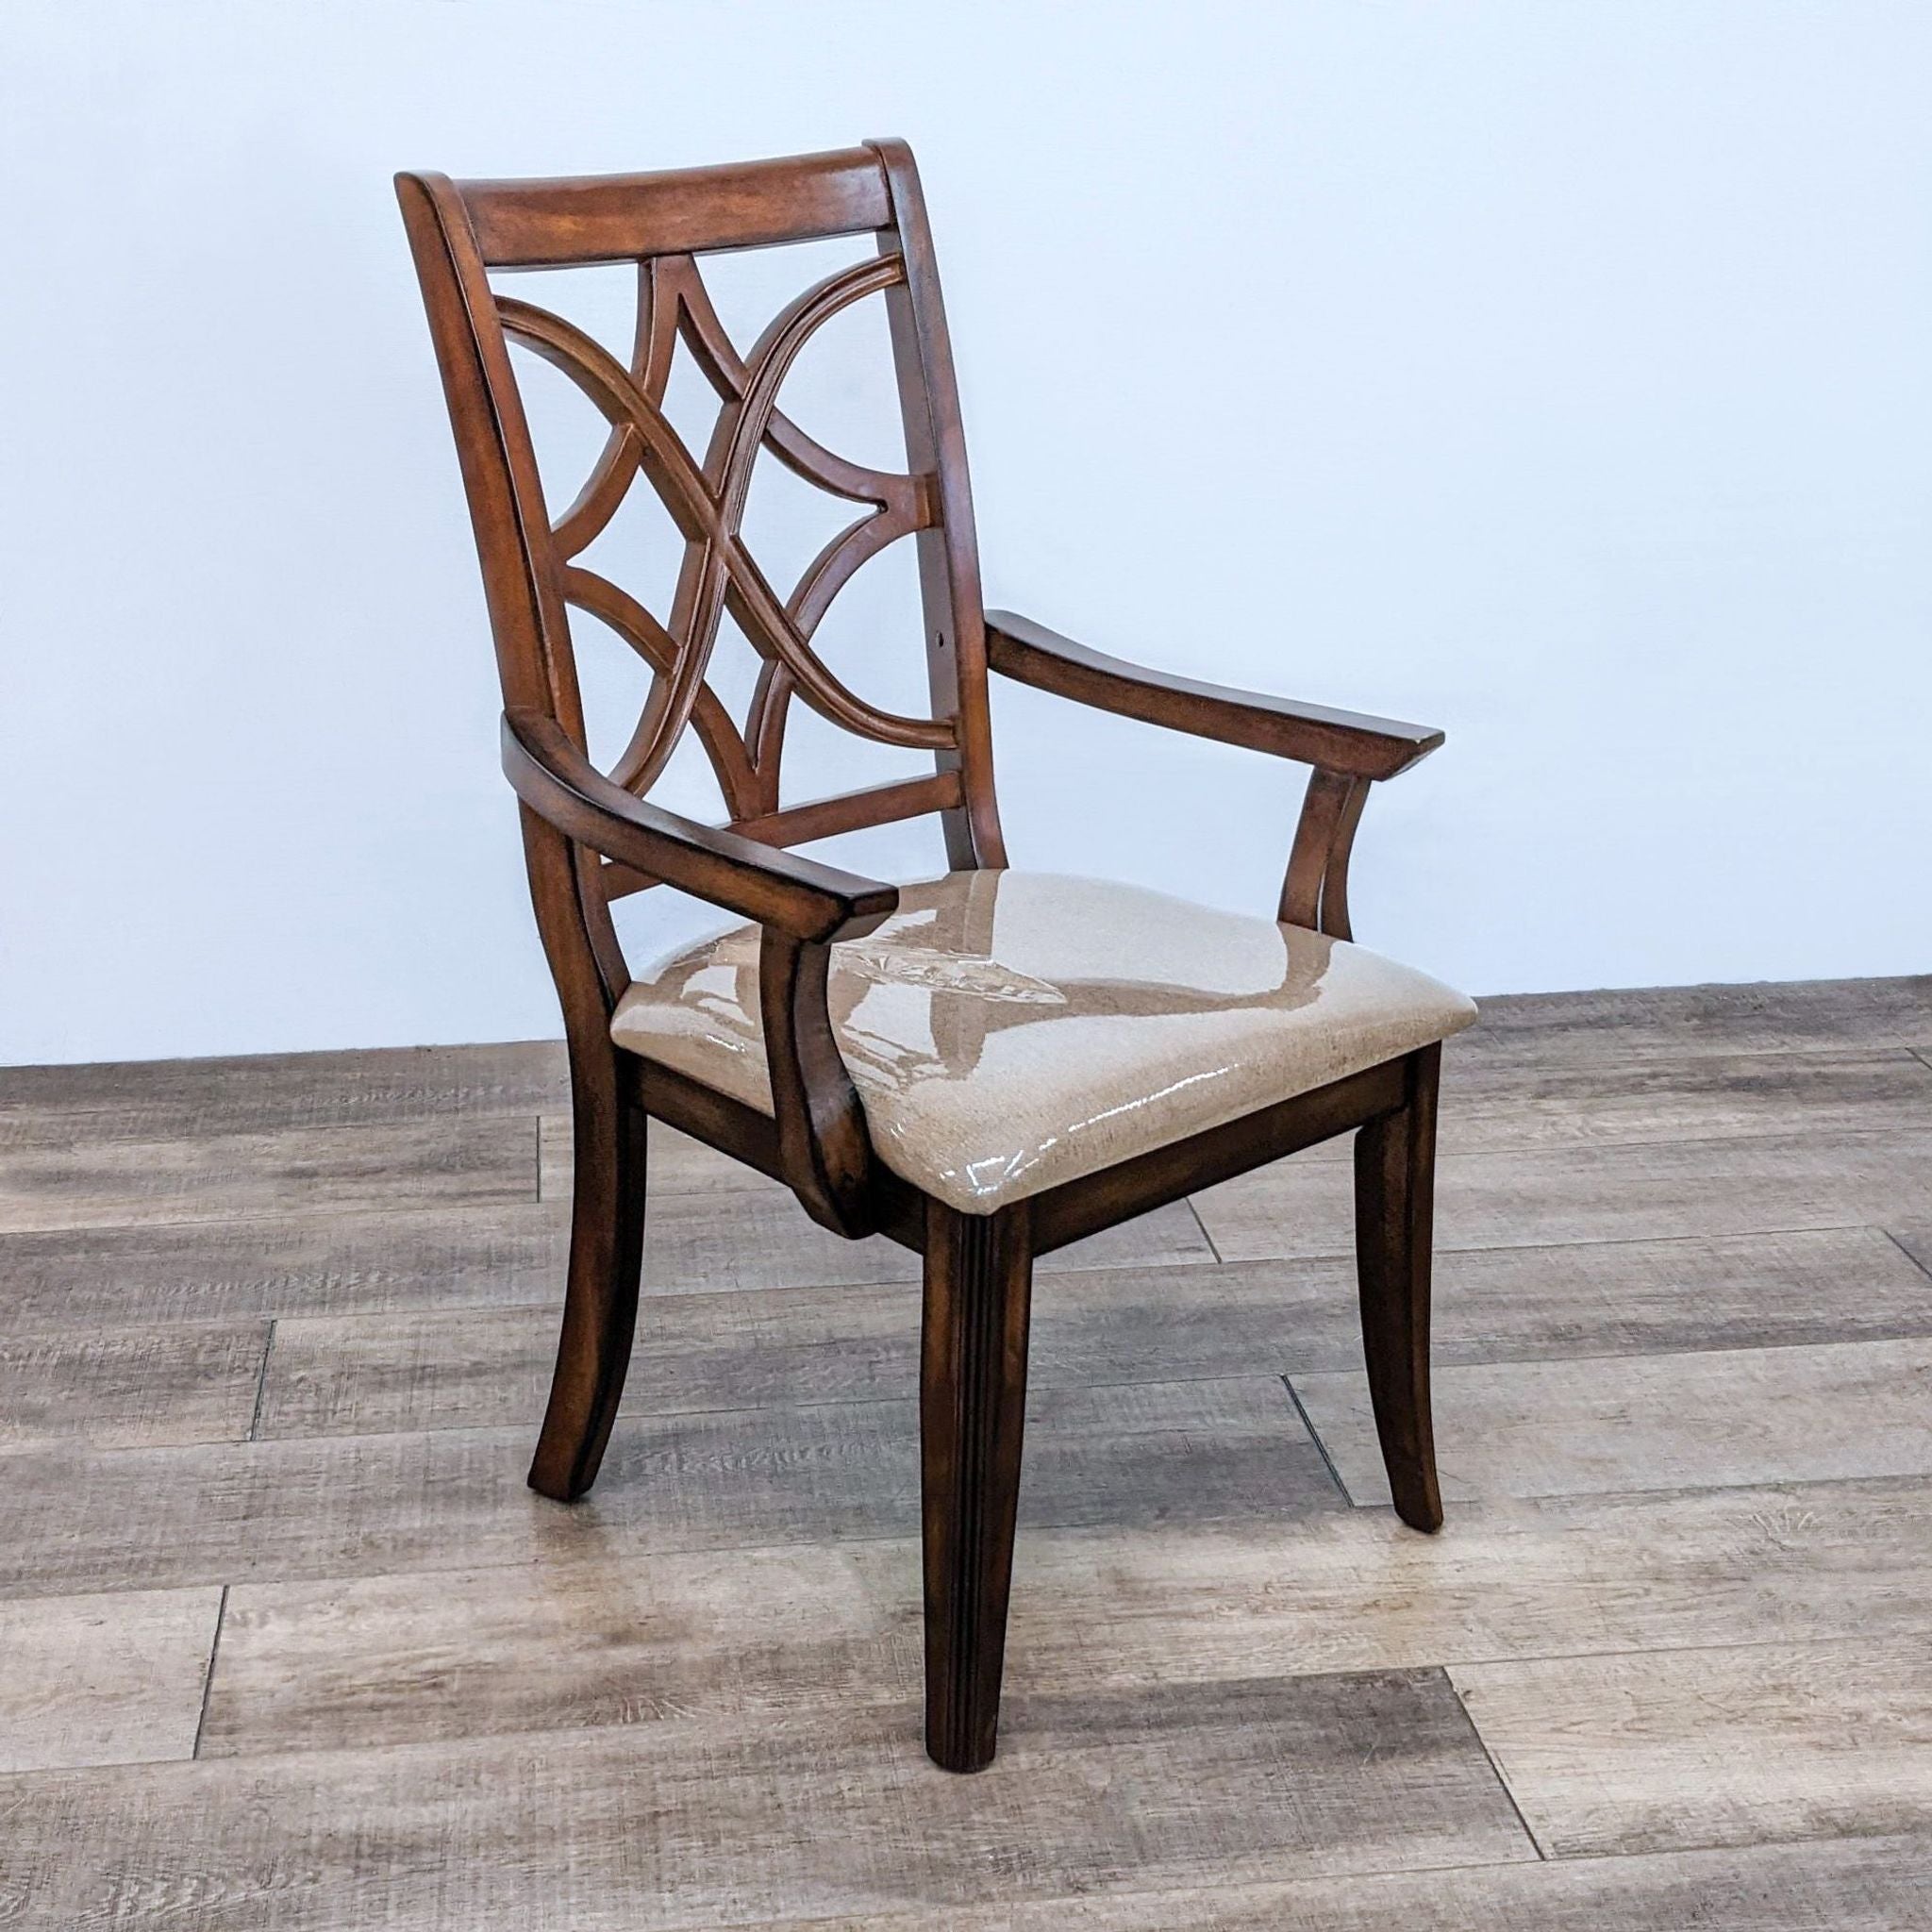 Macy's contemporary dining armchair with lattice back and cushioned seat on a wooden floor.